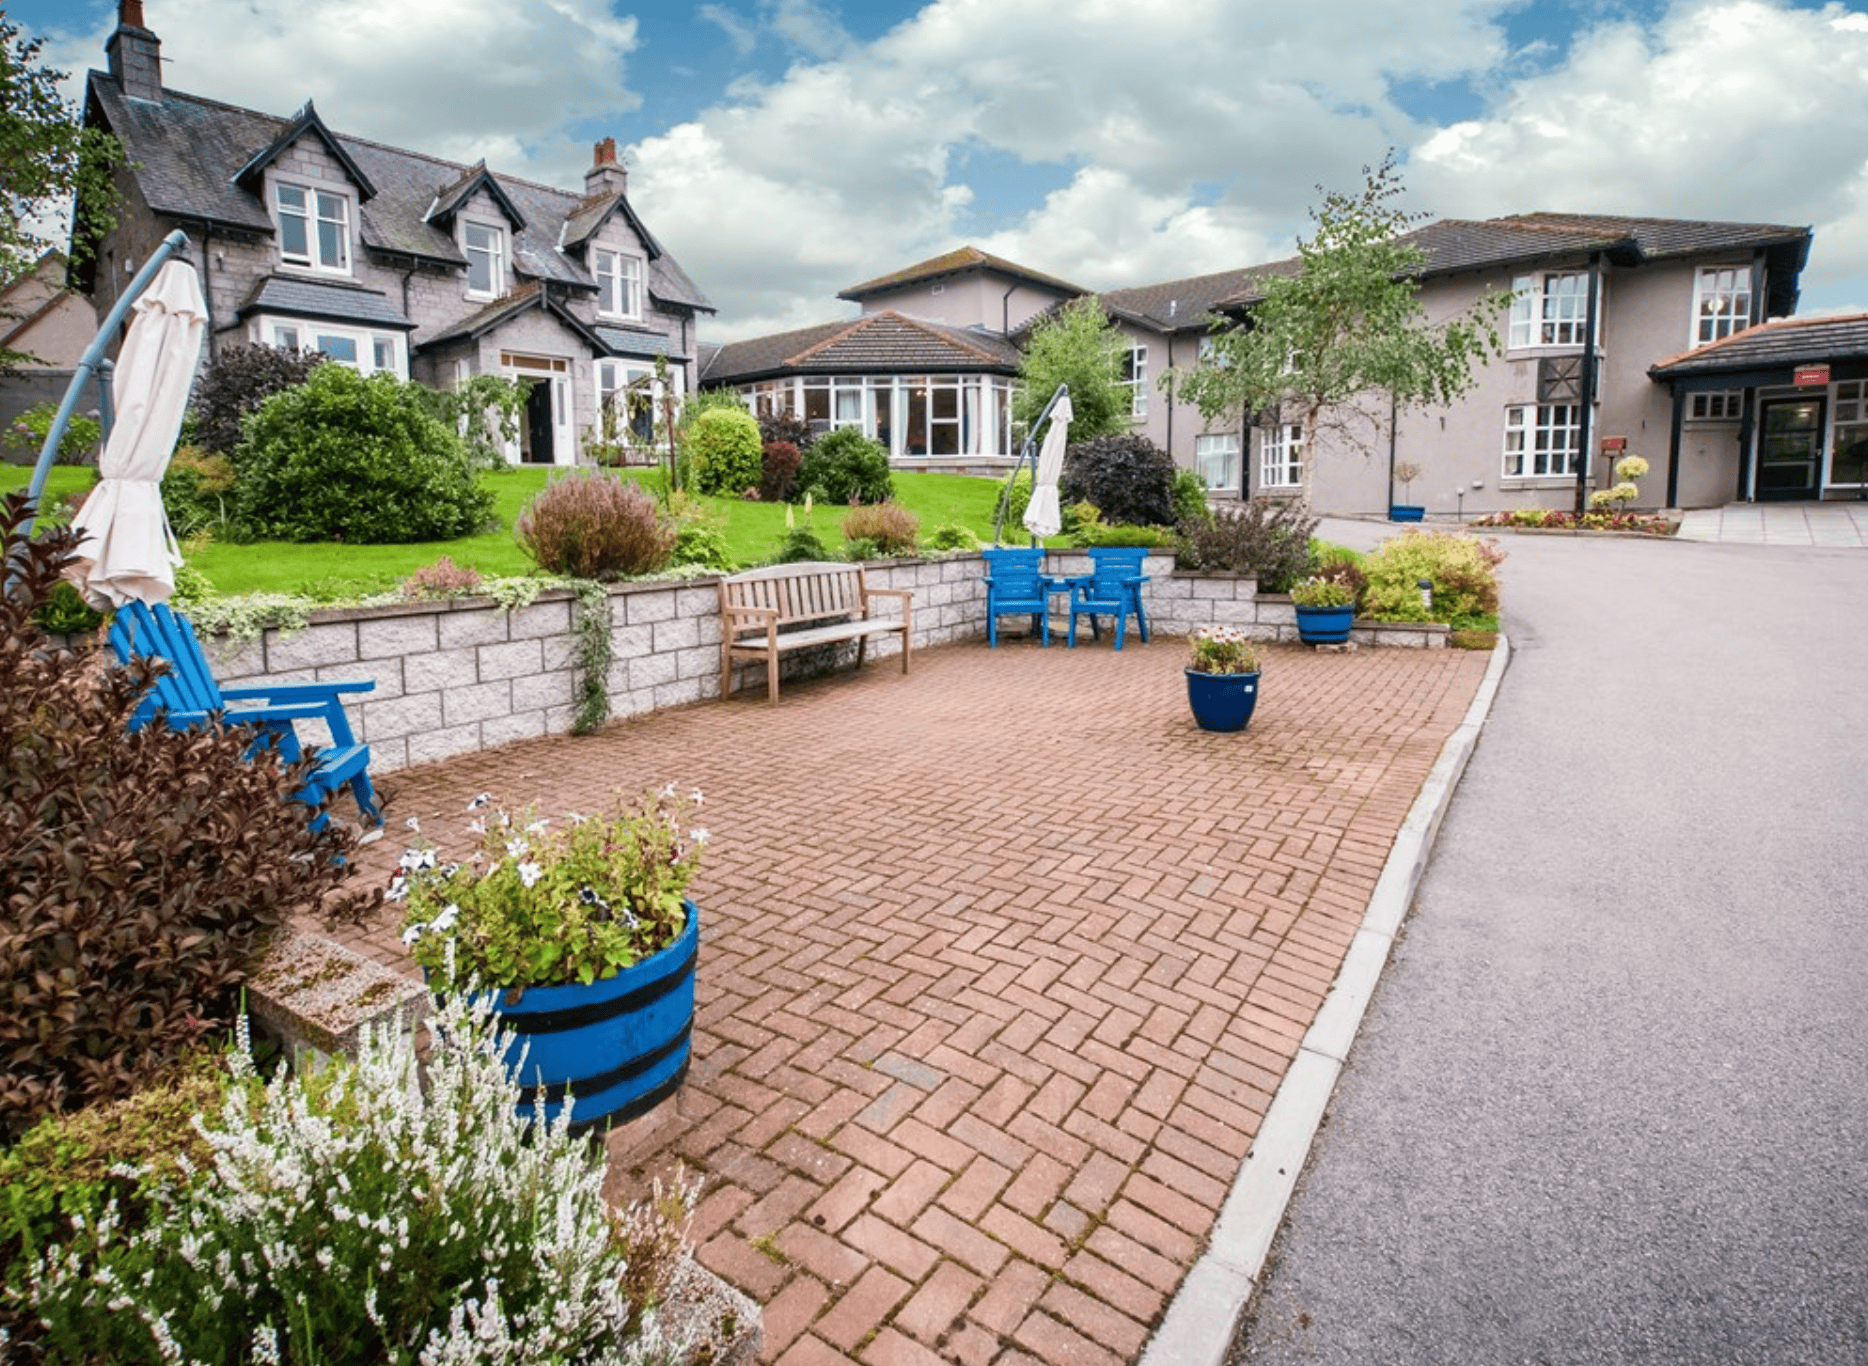 Exterior at Grove Care Home, Kemnay, Inverurie